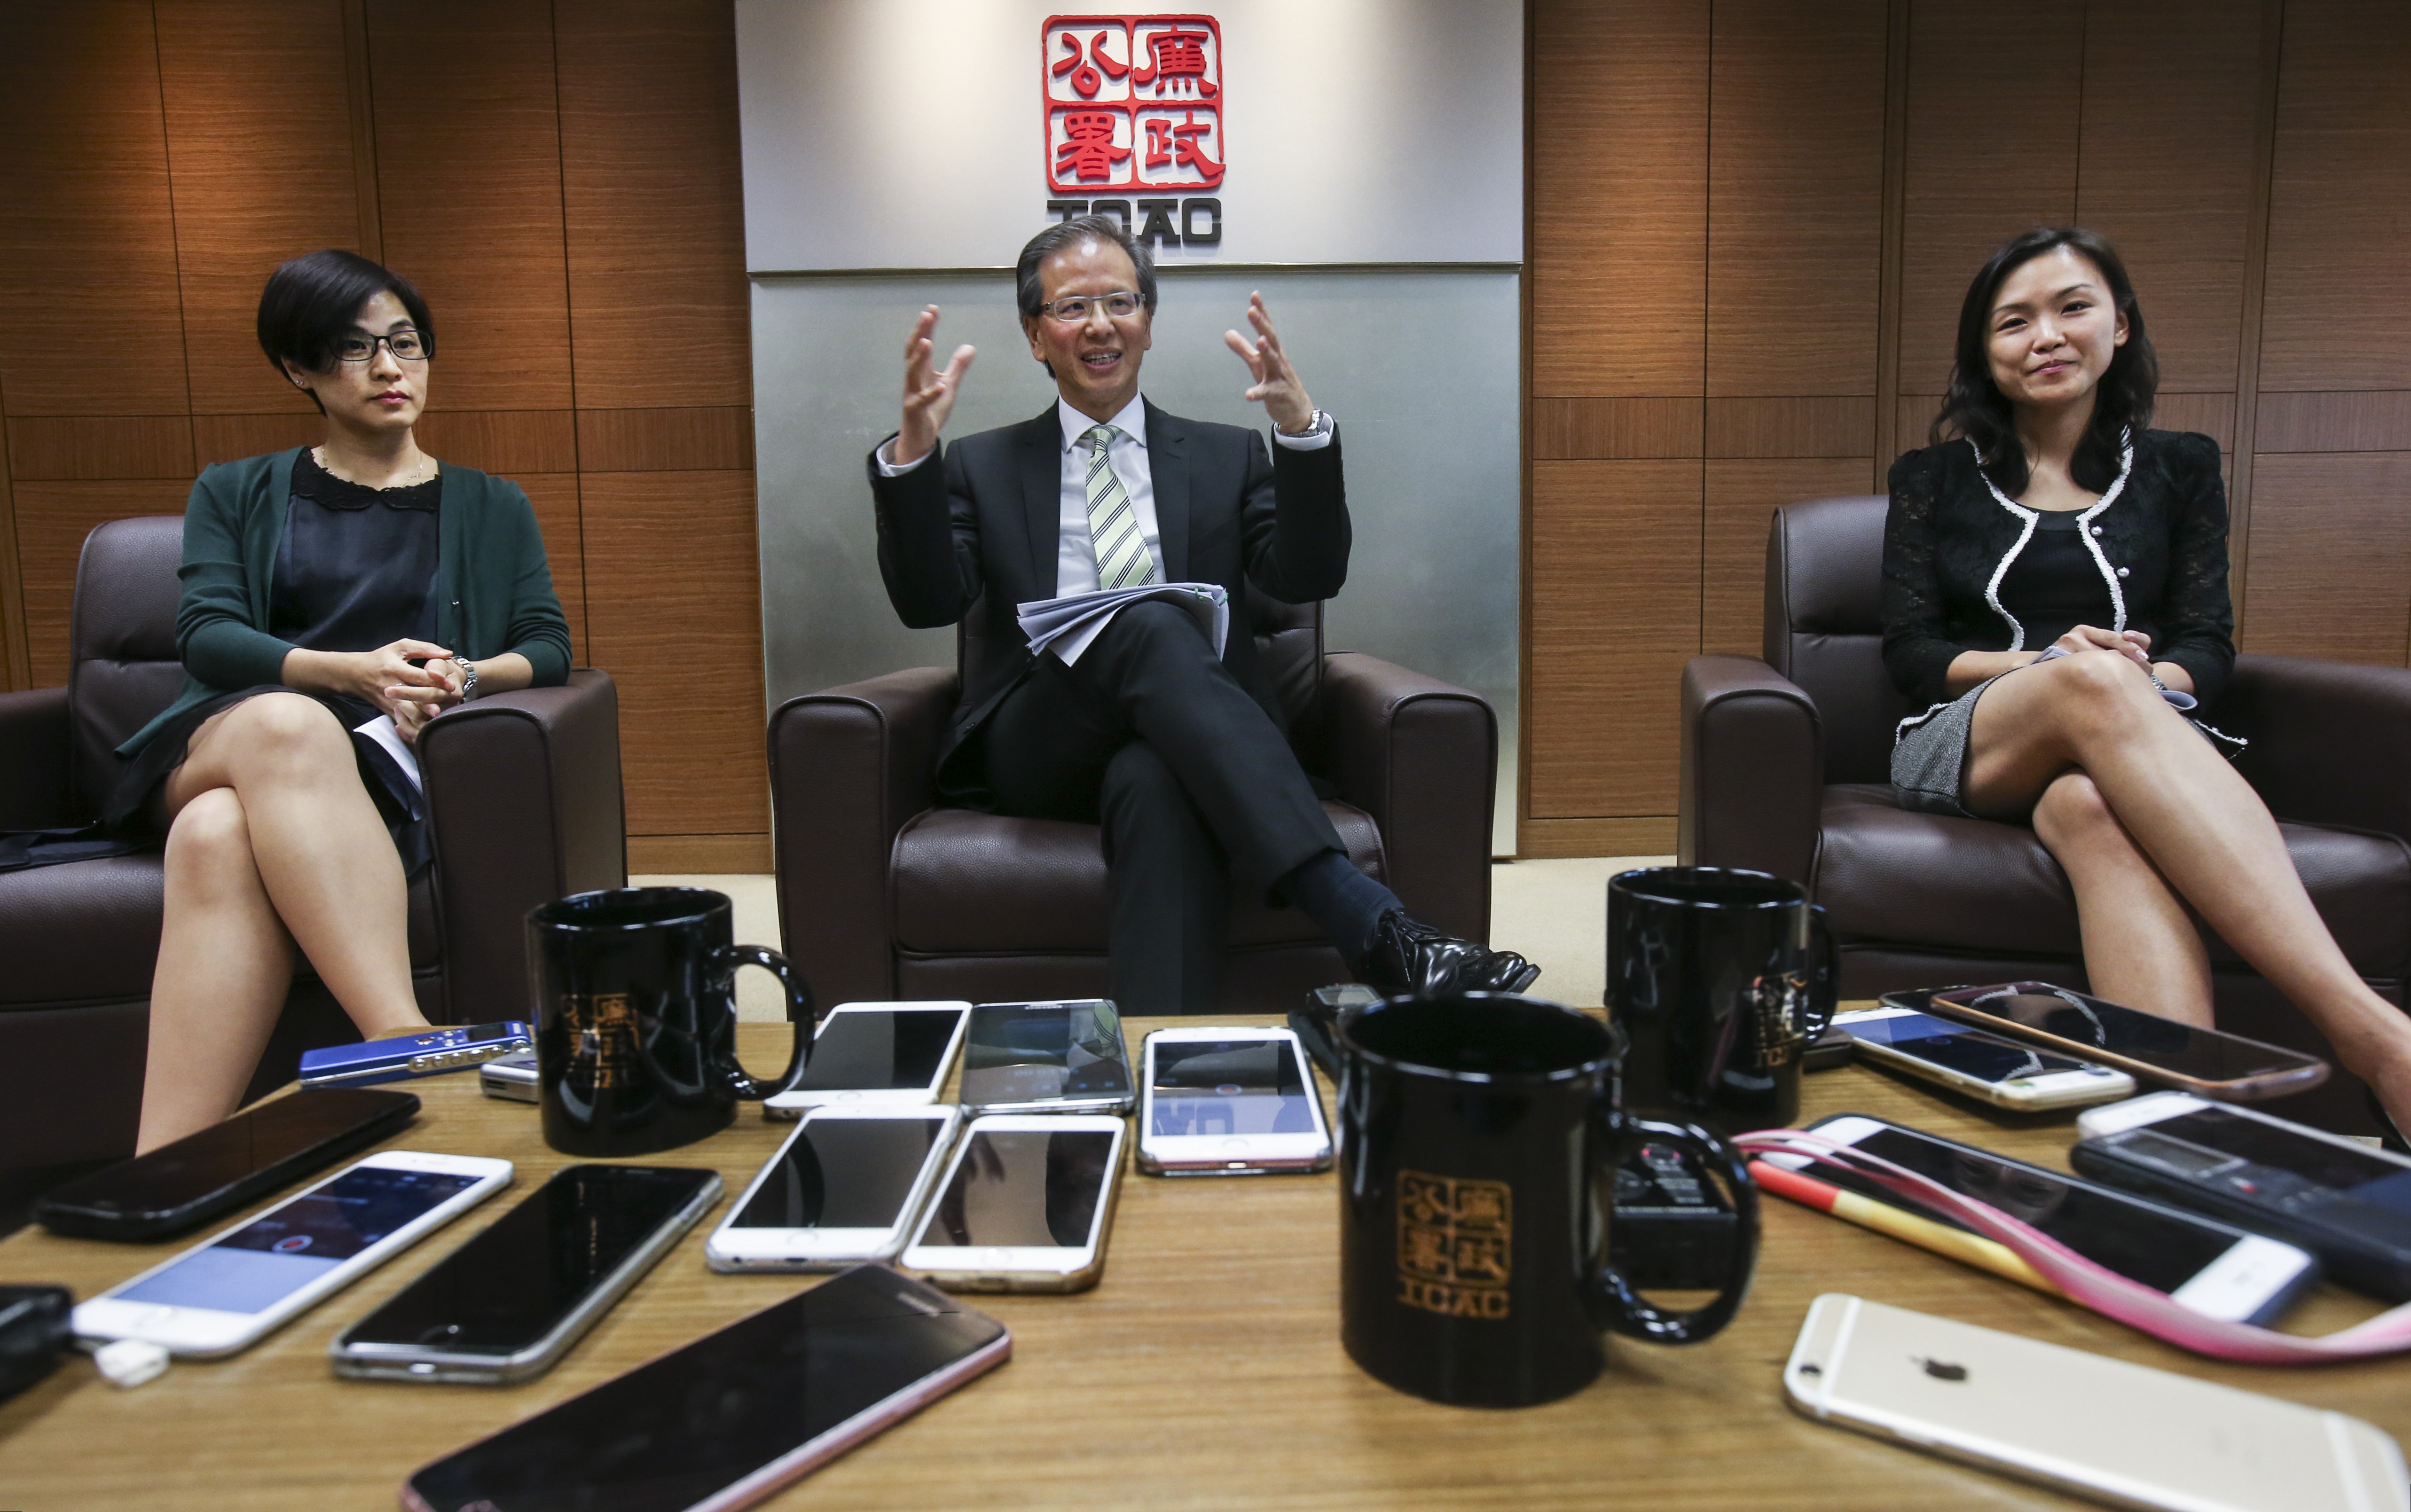 The ICAC’s director of investigation (government sector), Ricky Yu (centre), flanked by chief investigators Winnie Lee Wai-yee (left) and Hazel Law. Photo: David Wong